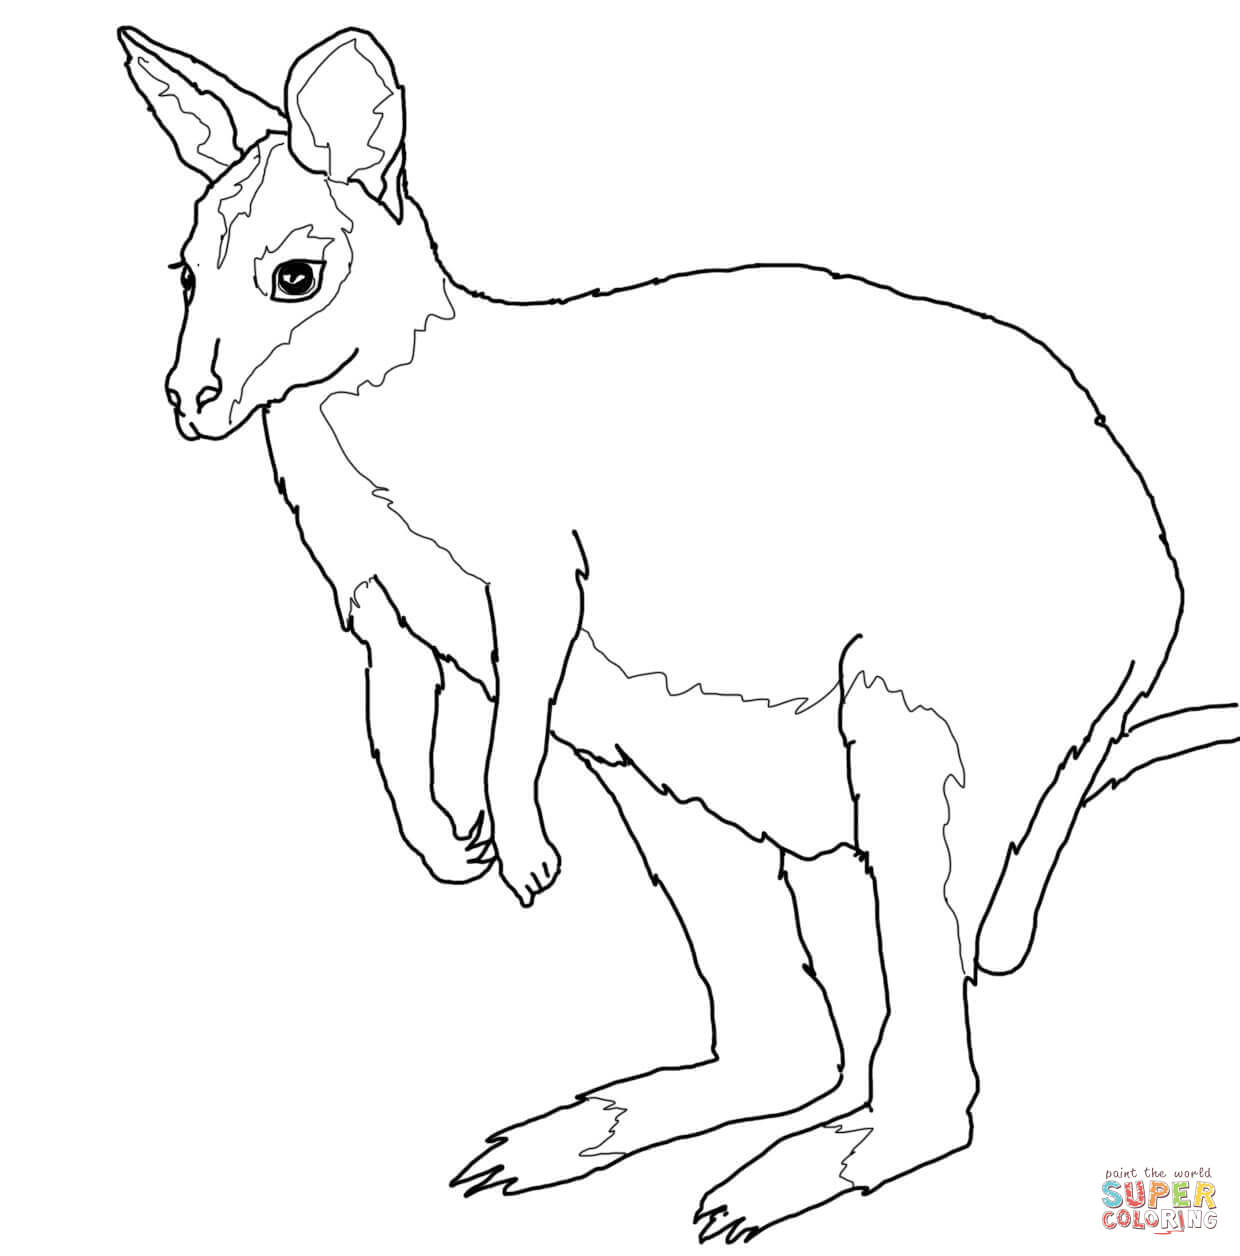 Wallaby coloring #11, Download drawings